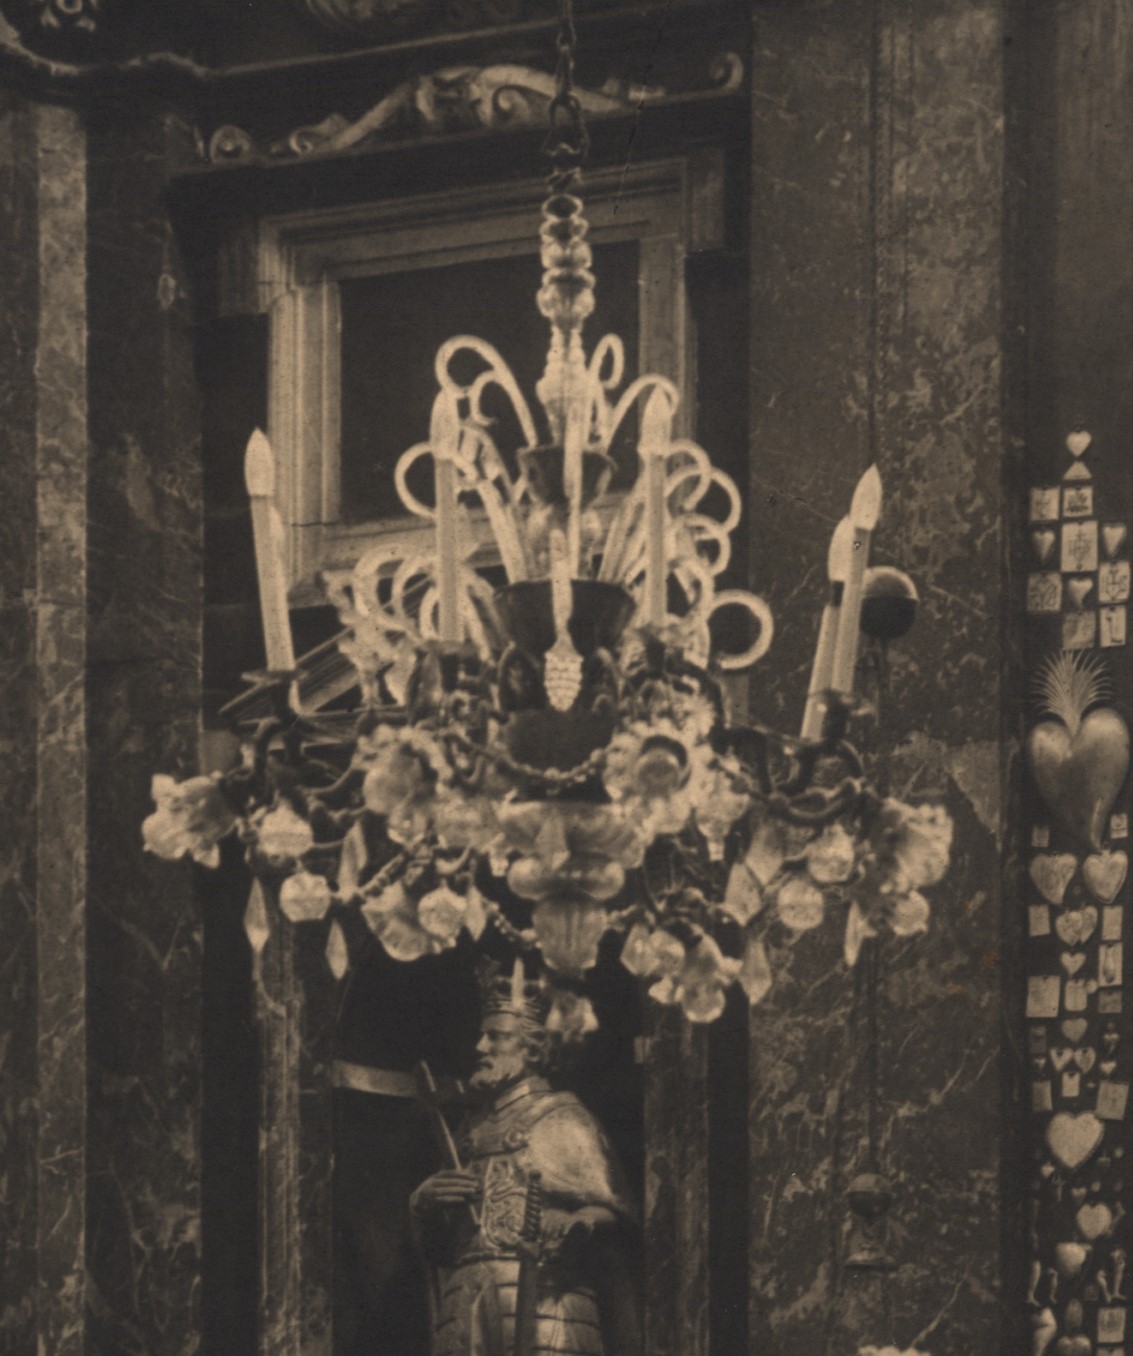 Chandelier at the Chapel of Saint Casimir of the Cathedral Basilica of Vilnius. Fragment of photo by Jan Bułhak, 1931, in: Lietuvos dailės muziejus, inv. Nr. Fi-106